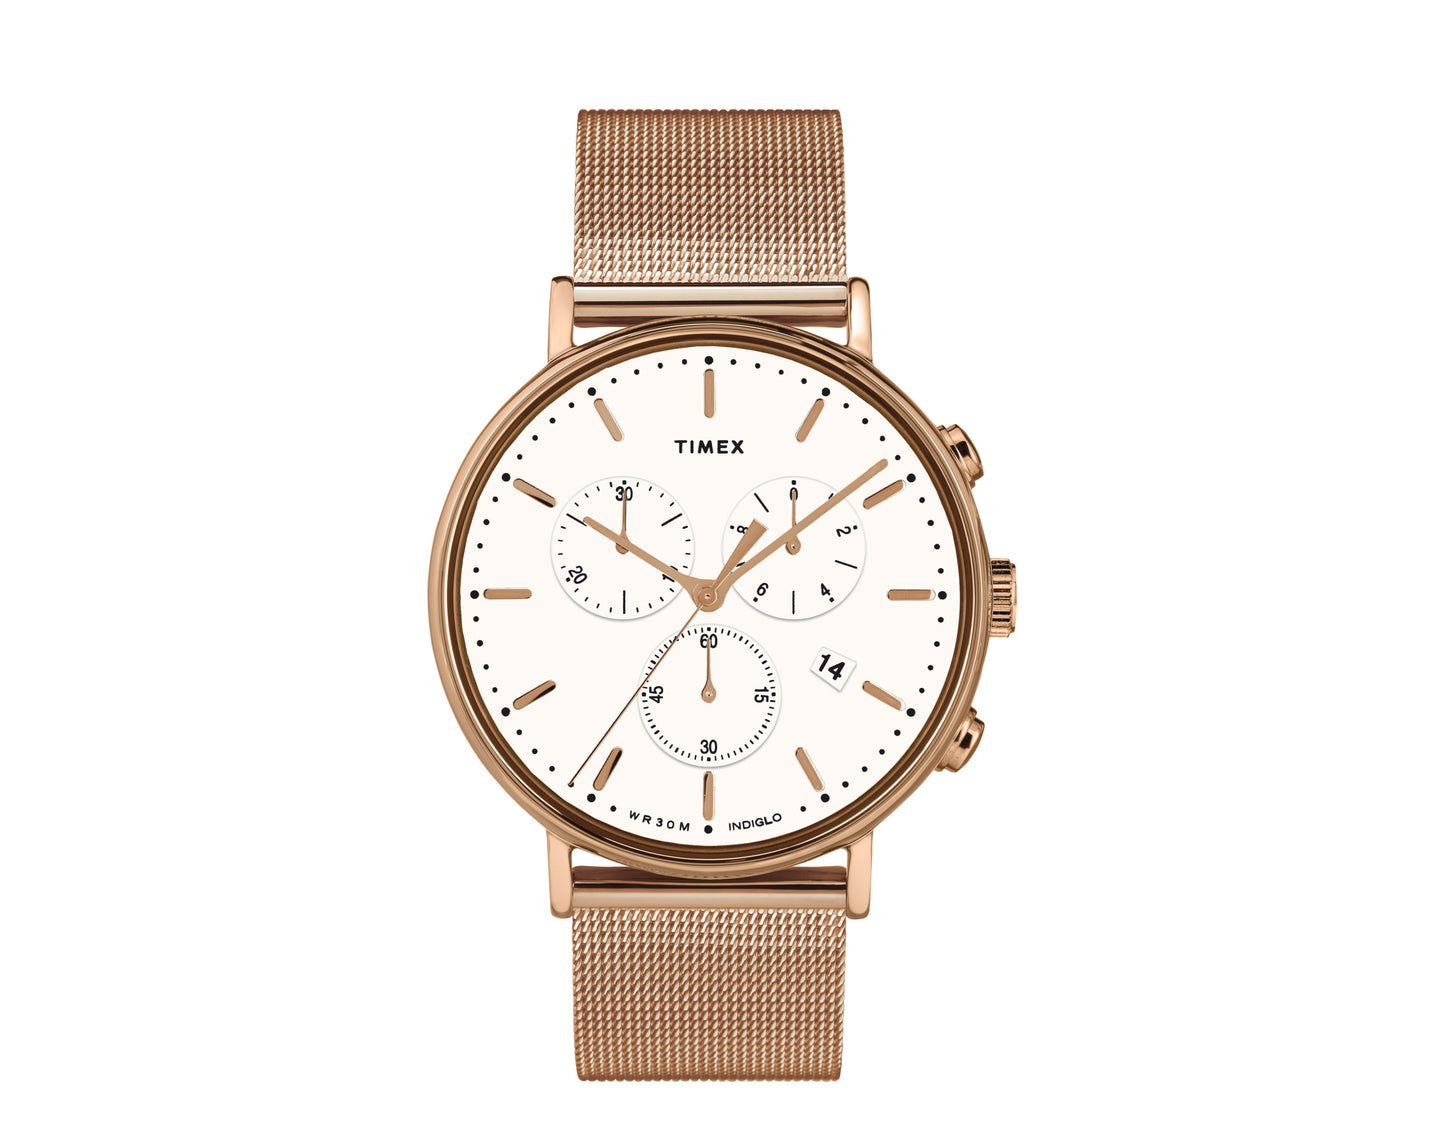 Timex Fairfield Chrono 41mm Stainless Steel Rose-Gold/White Watch TW2T37200VQ